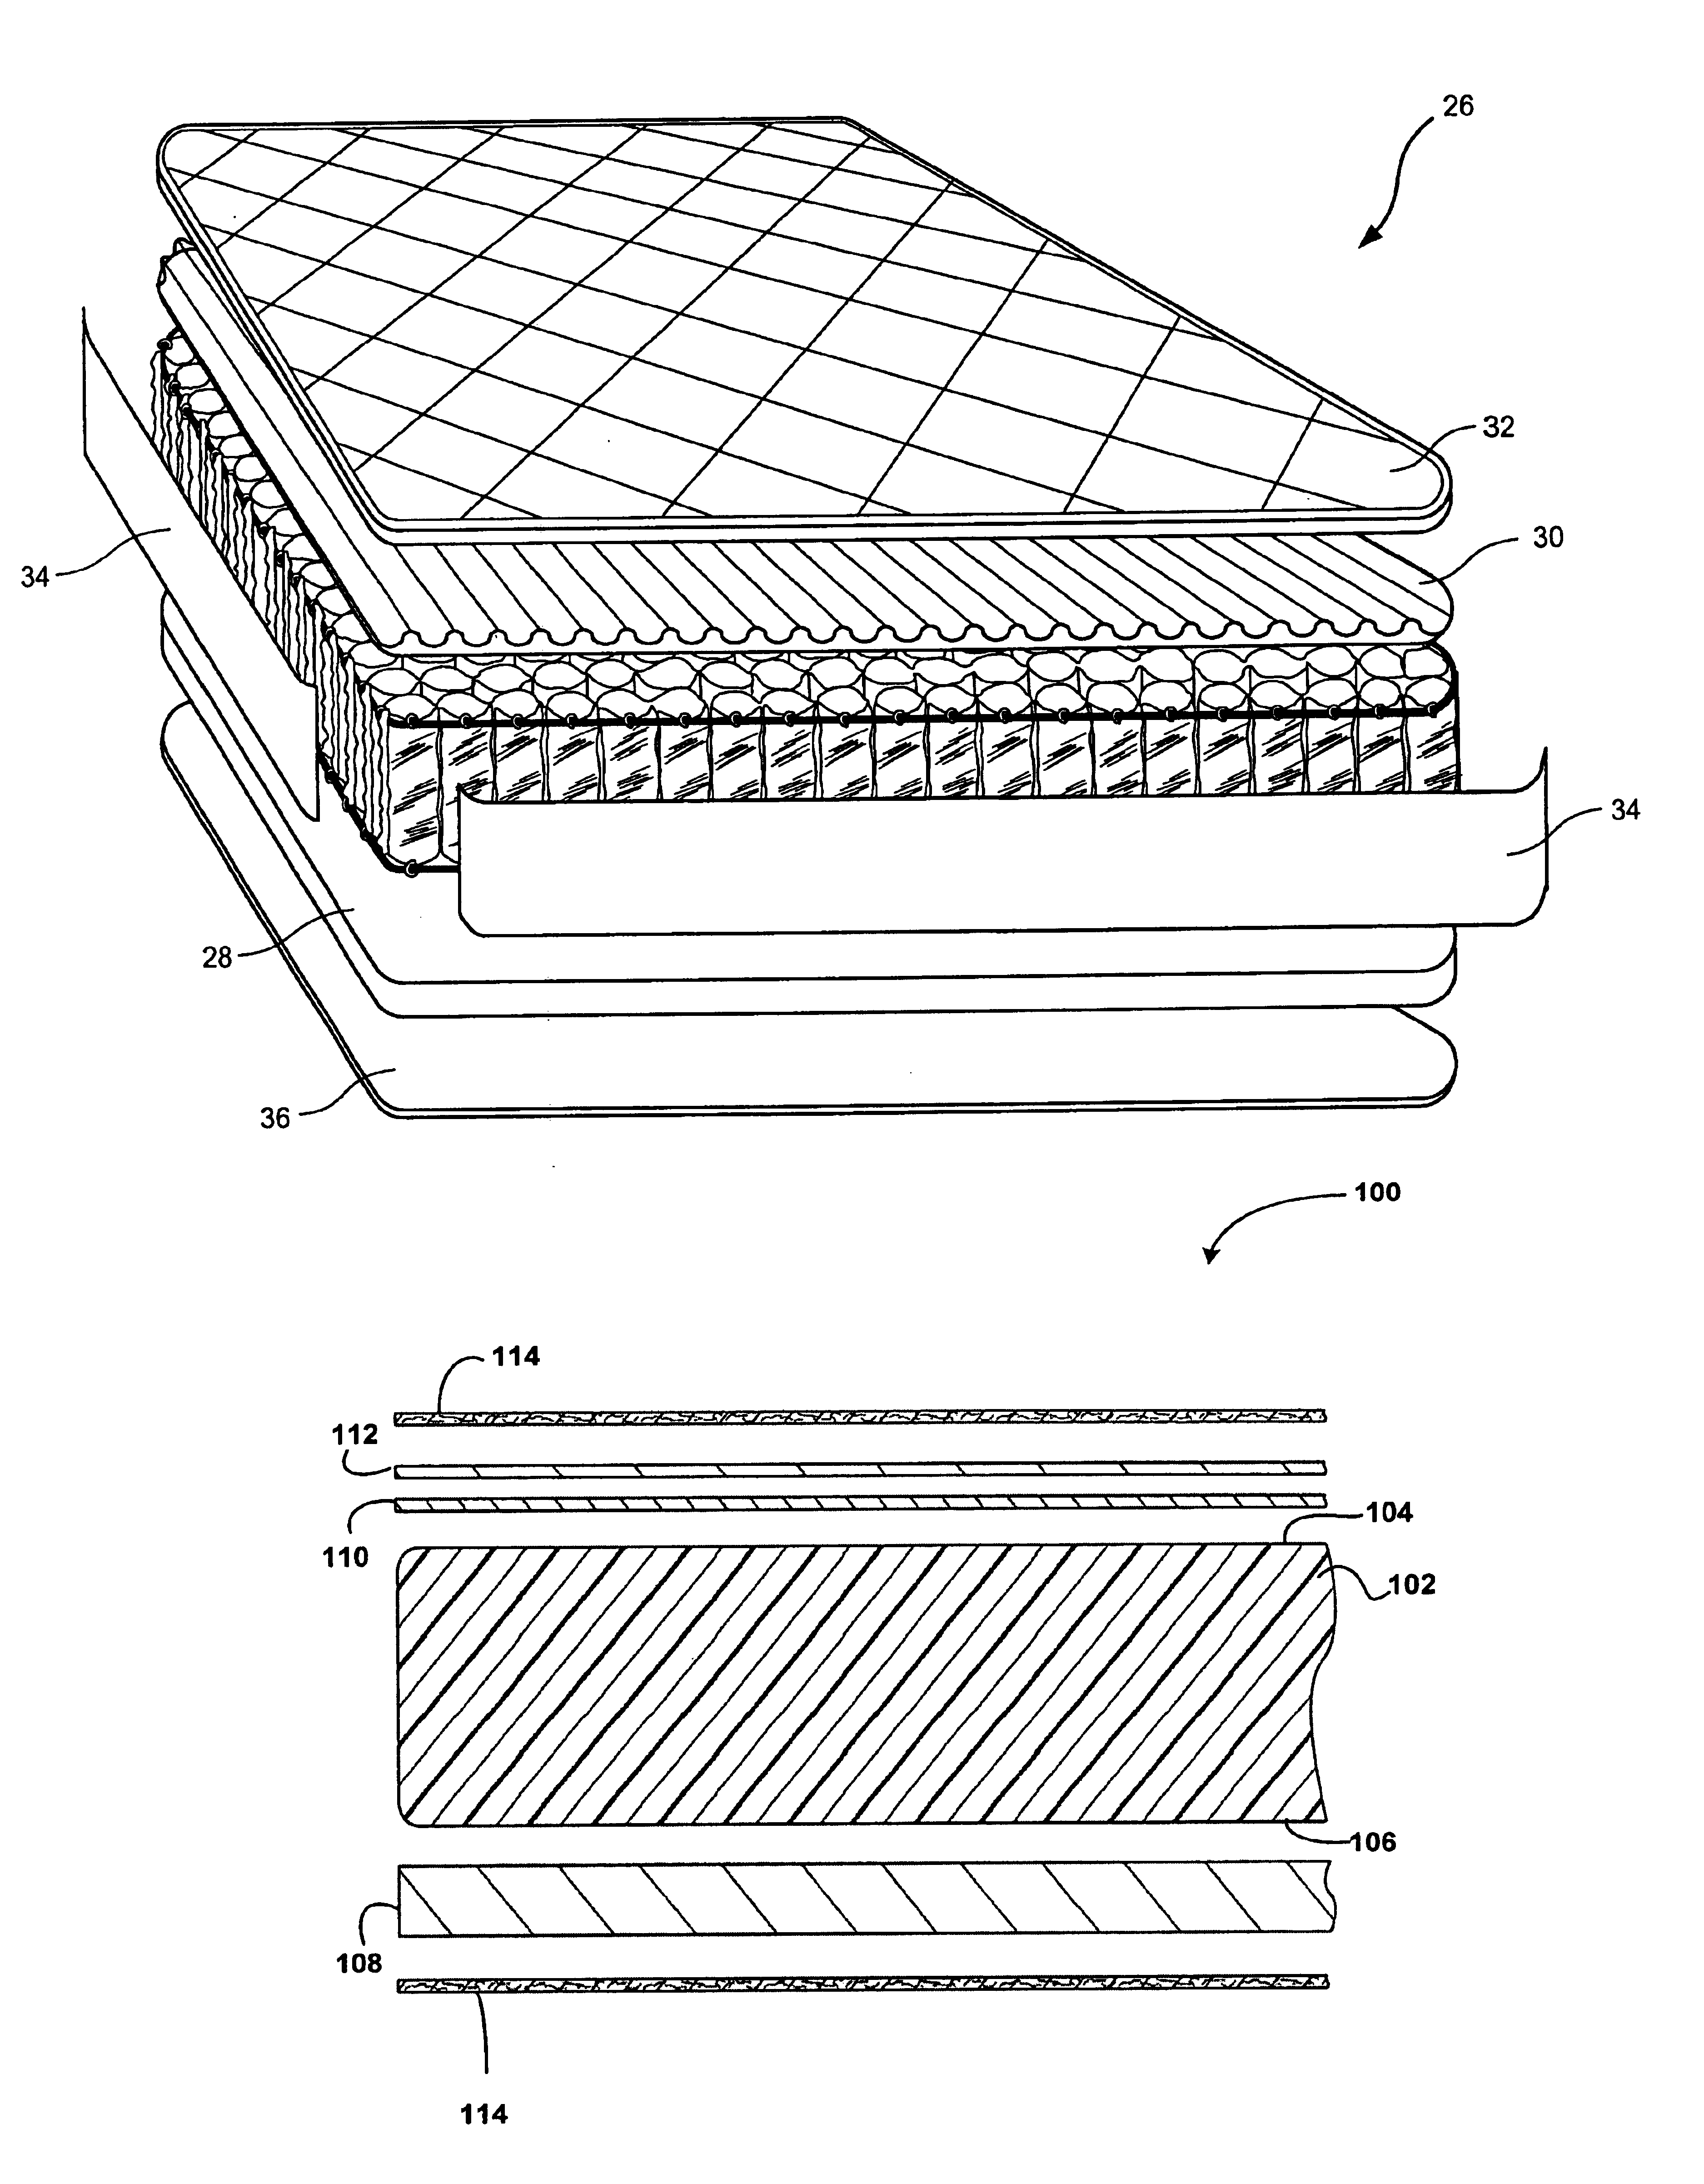 No-flip mattress systems and methods